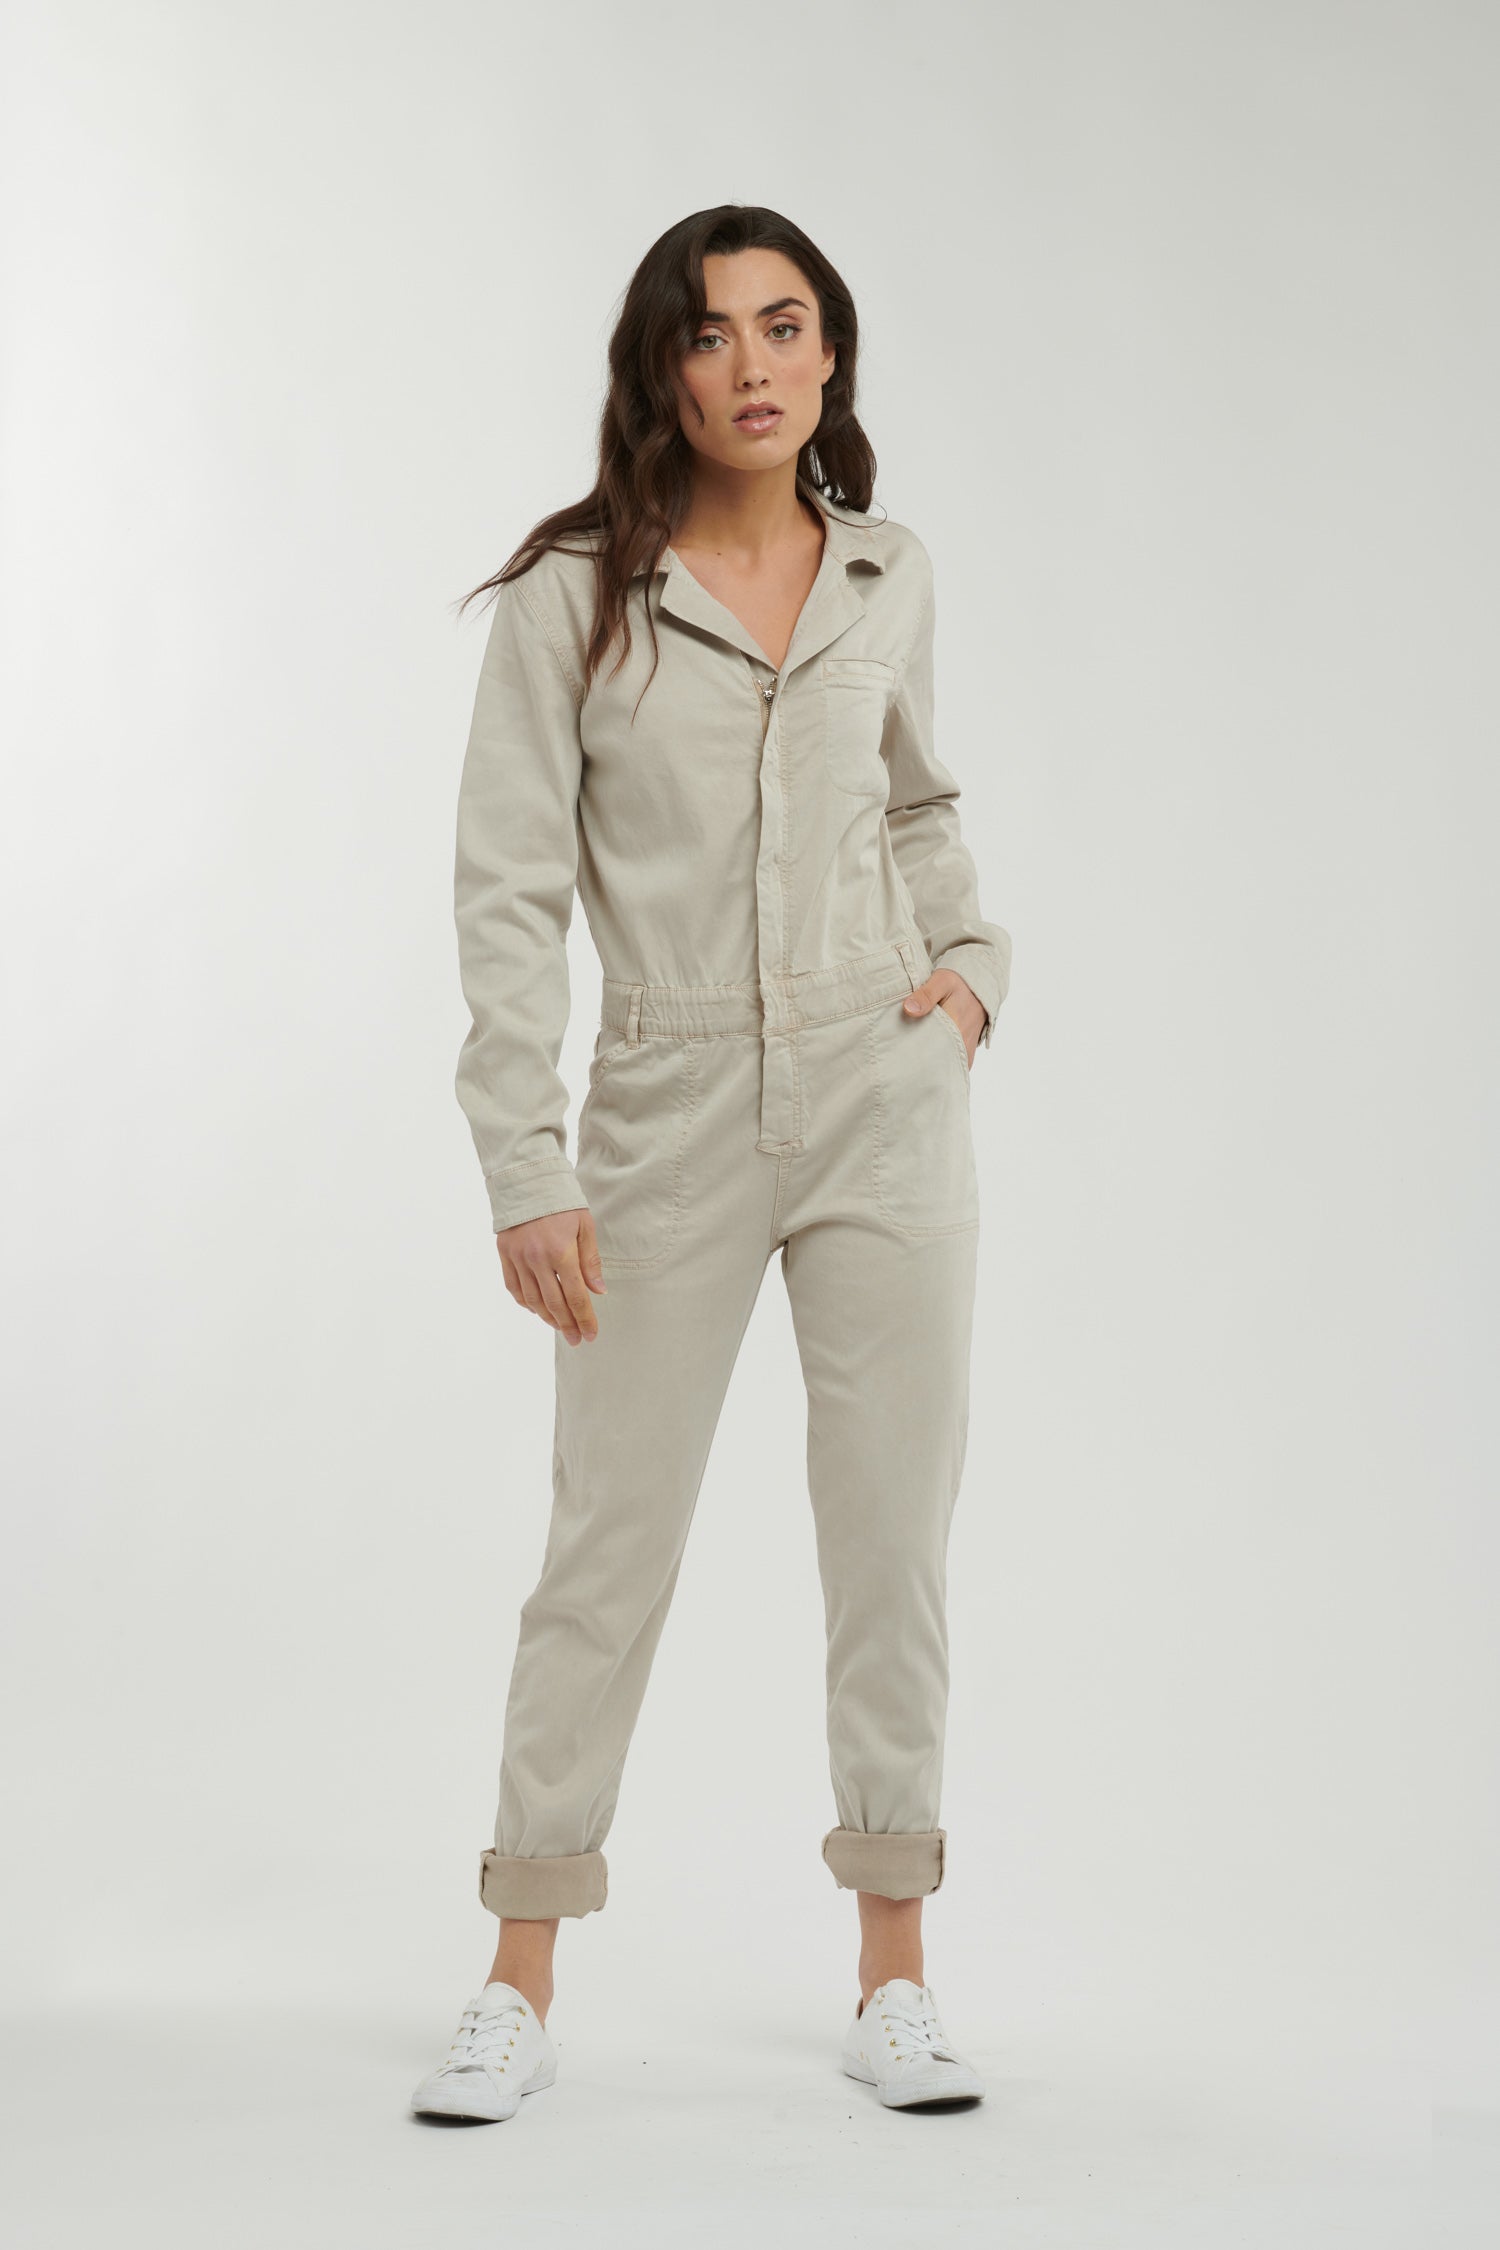 Jumpsuit - Beige-Playsuits, Jumpsuits & Overalls-Italian Star-The Bay Room